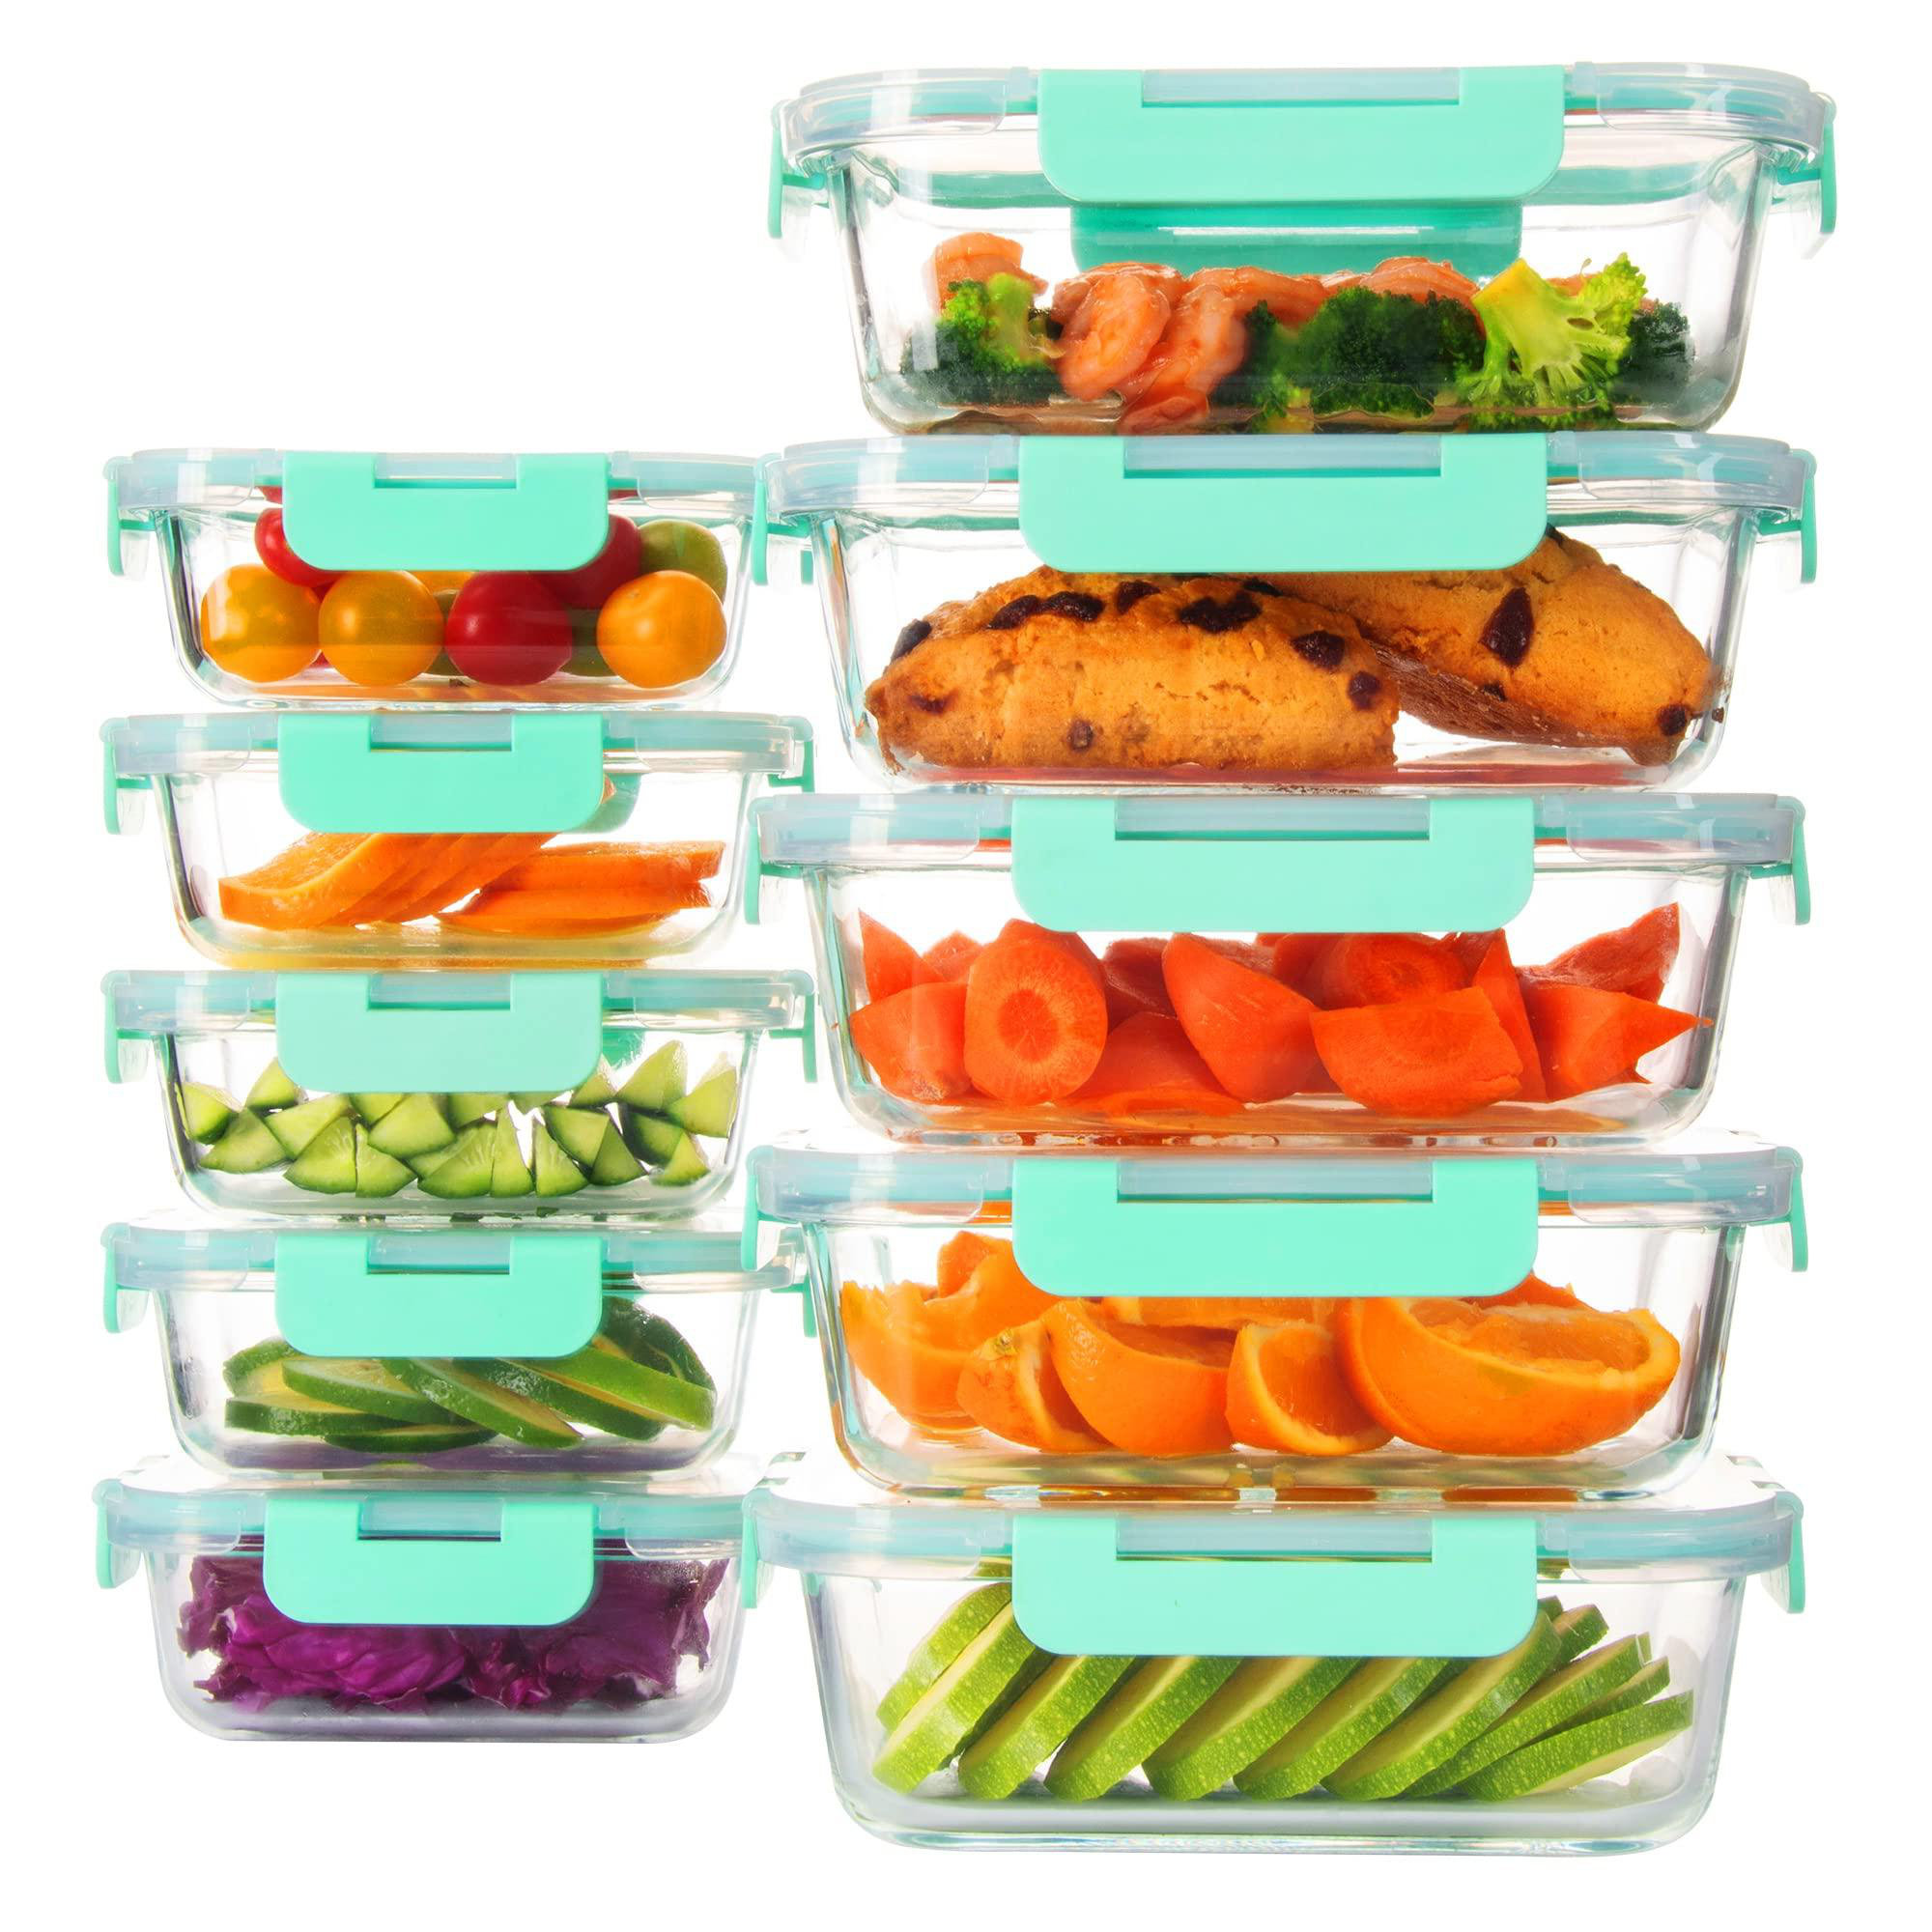 10-Pack] Glass Food Storage Containers (A Set of Five Colors), Meal Prep  Containers with Lids for Kitchen, Home Use - Airtight Glass Lunch Boxes 